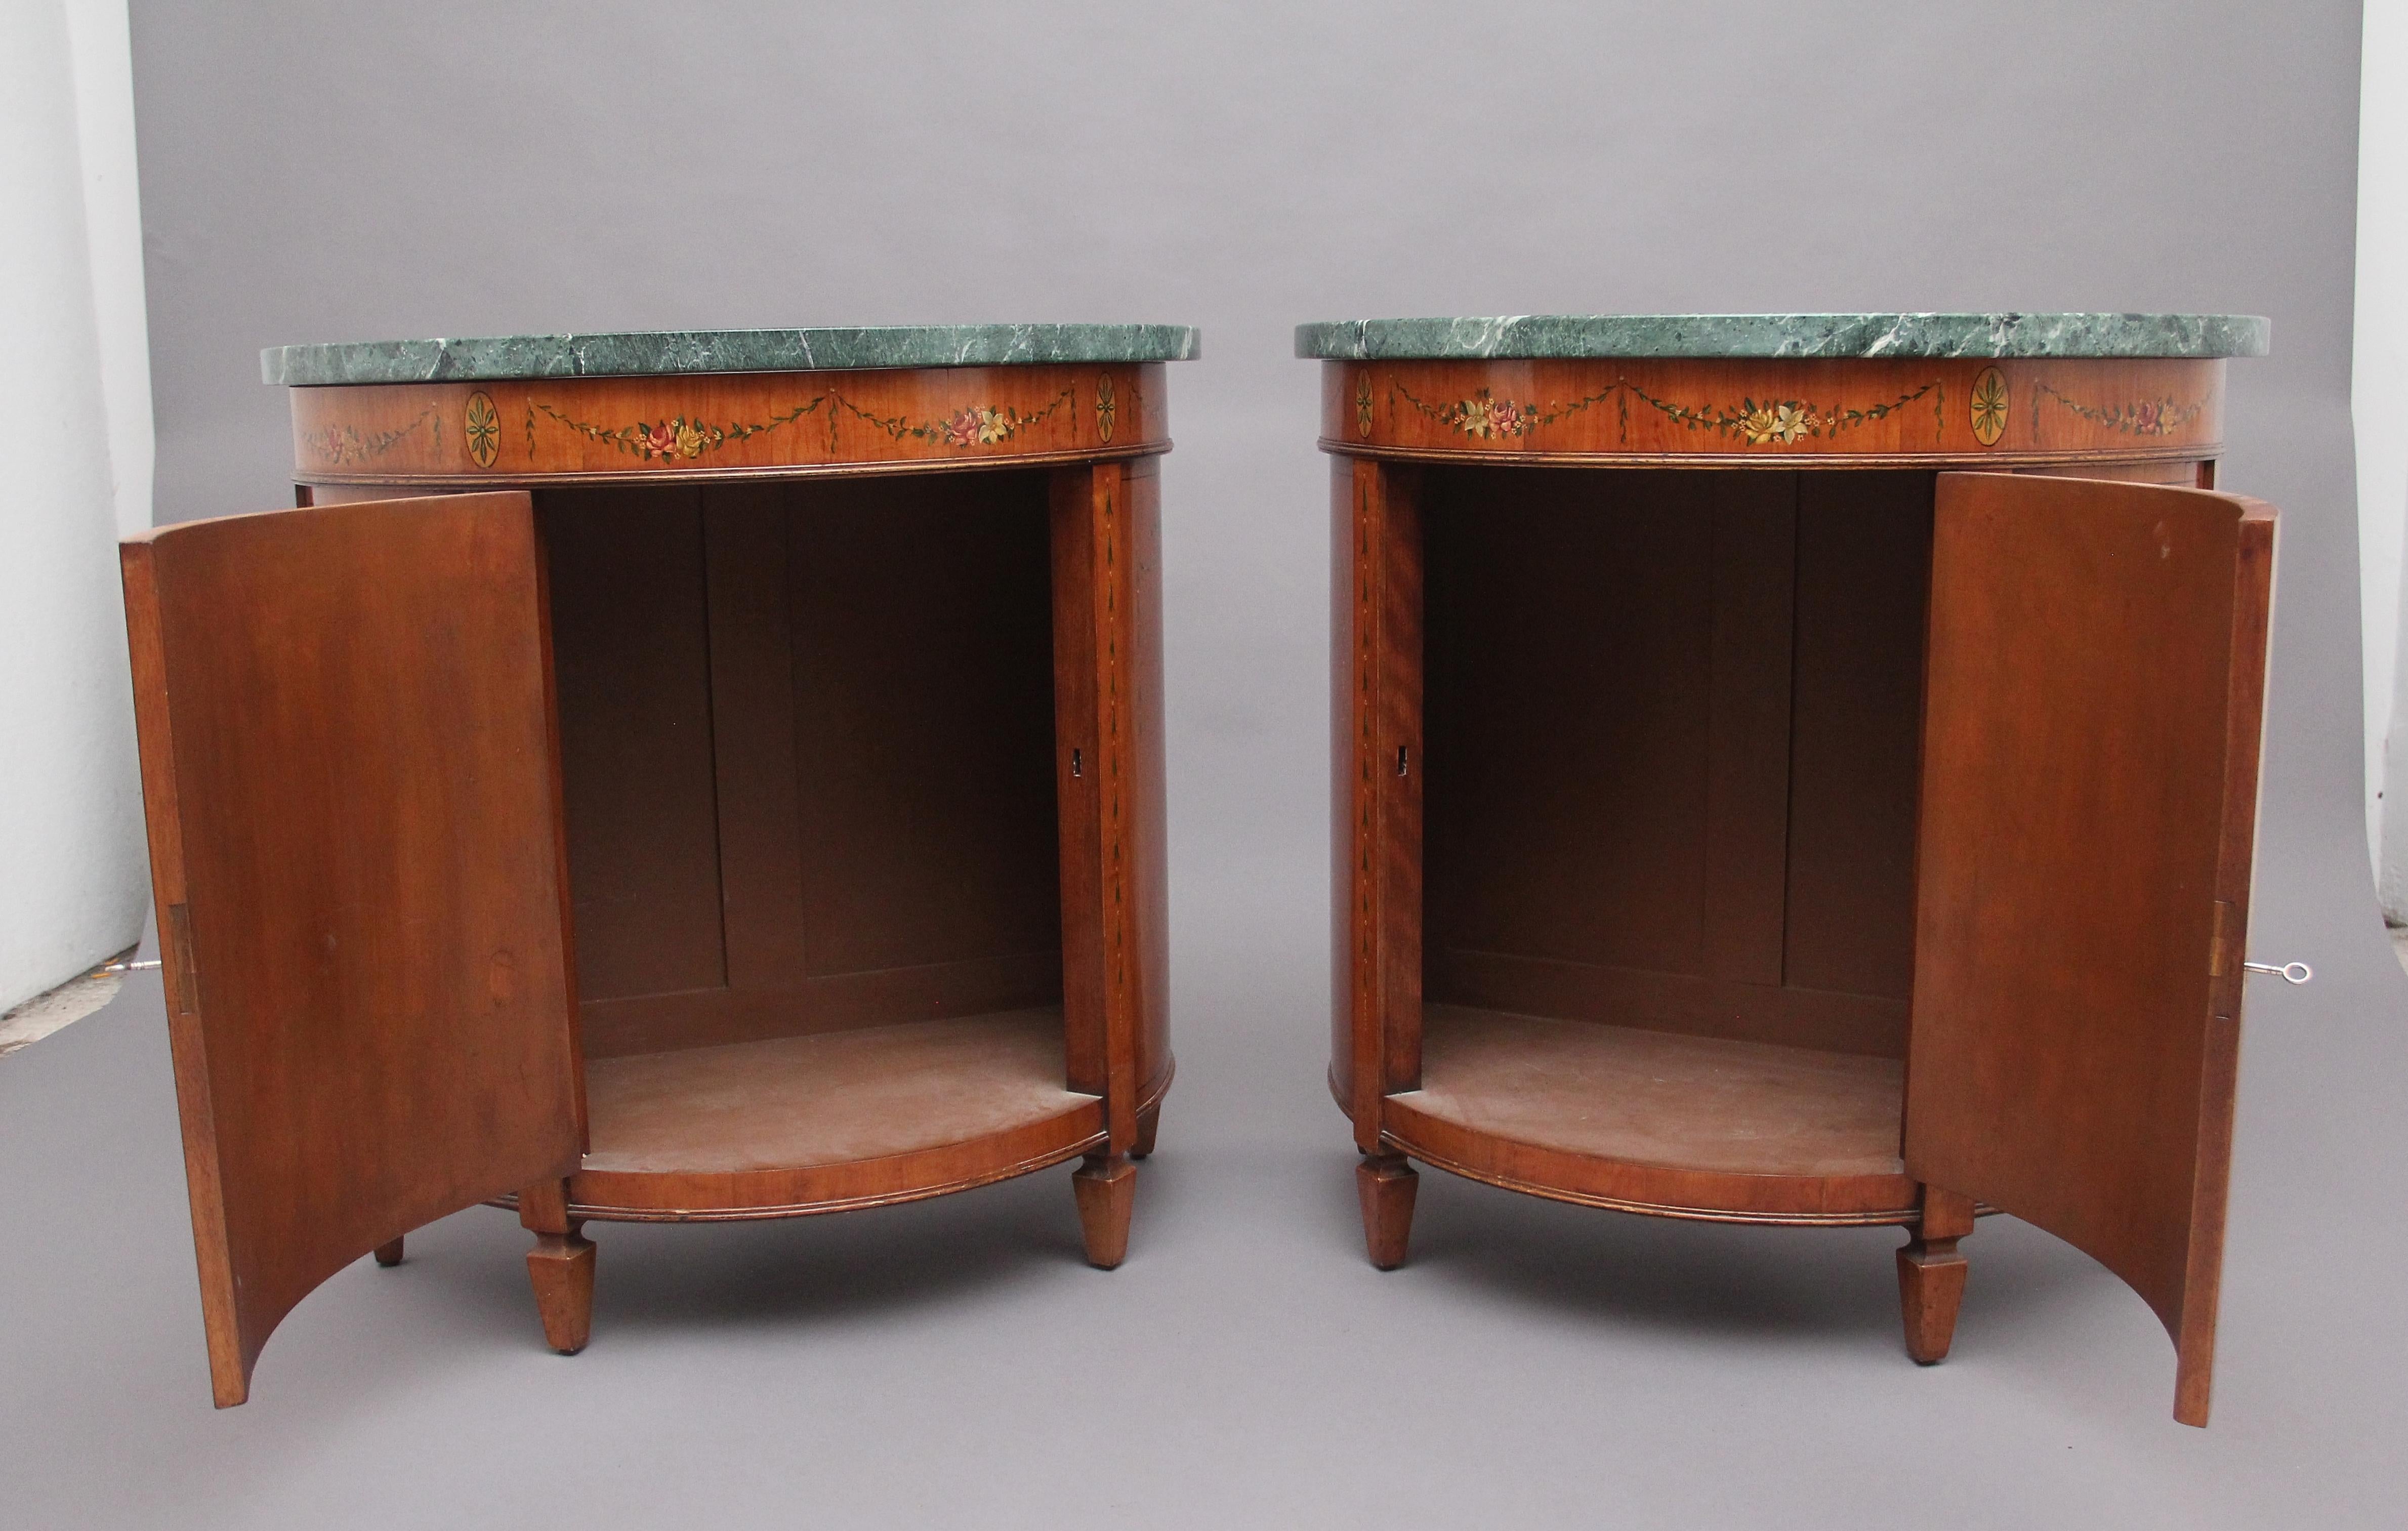 A fabulous pair of early 20th century satinwood and painted demi lune cabinets in the Sheraton style, having the original turquoise veined marble tops above a decorative frieze with painted floral patterns and oval panels, the shaped single door